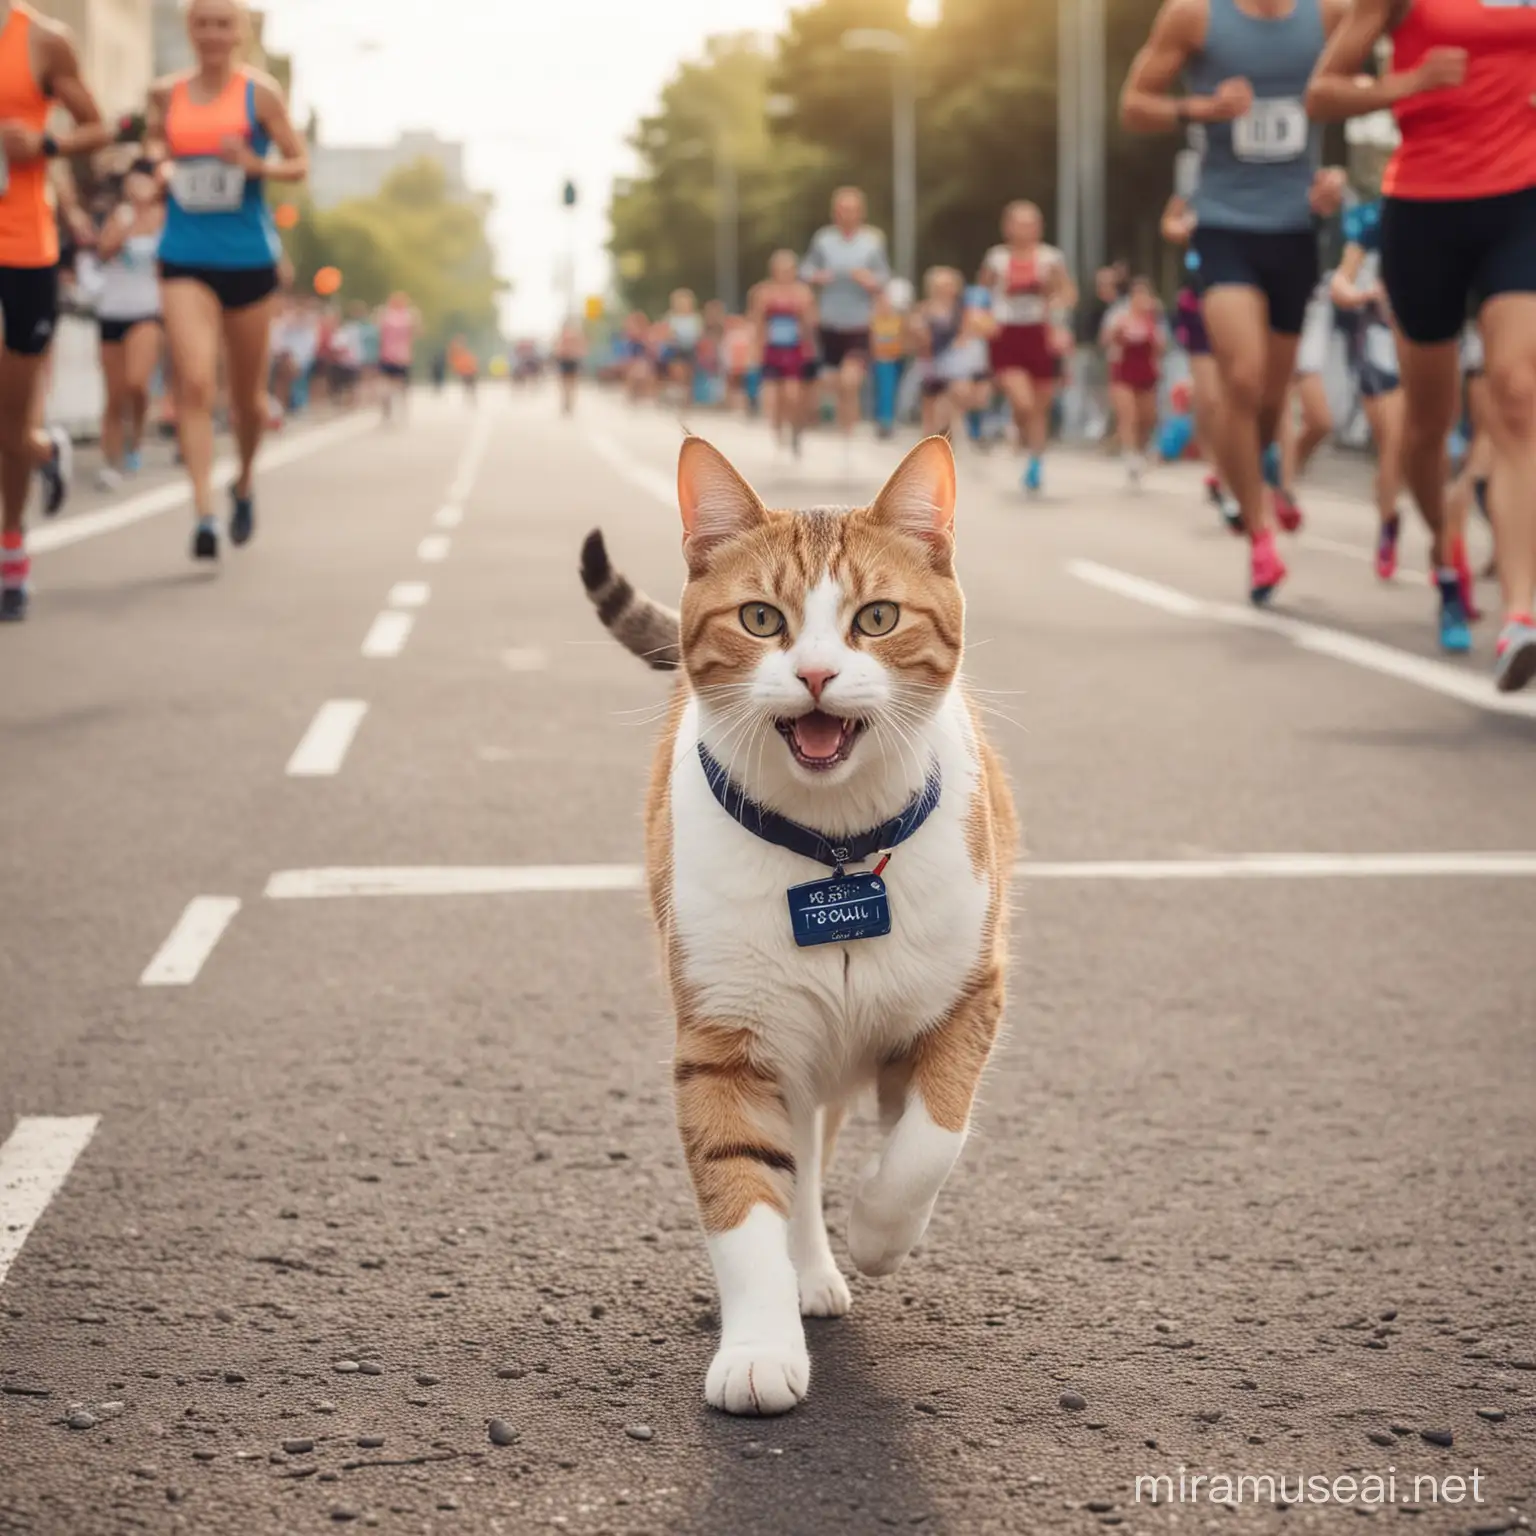 Cute Cat Wins Marathon Race with Happy Expression